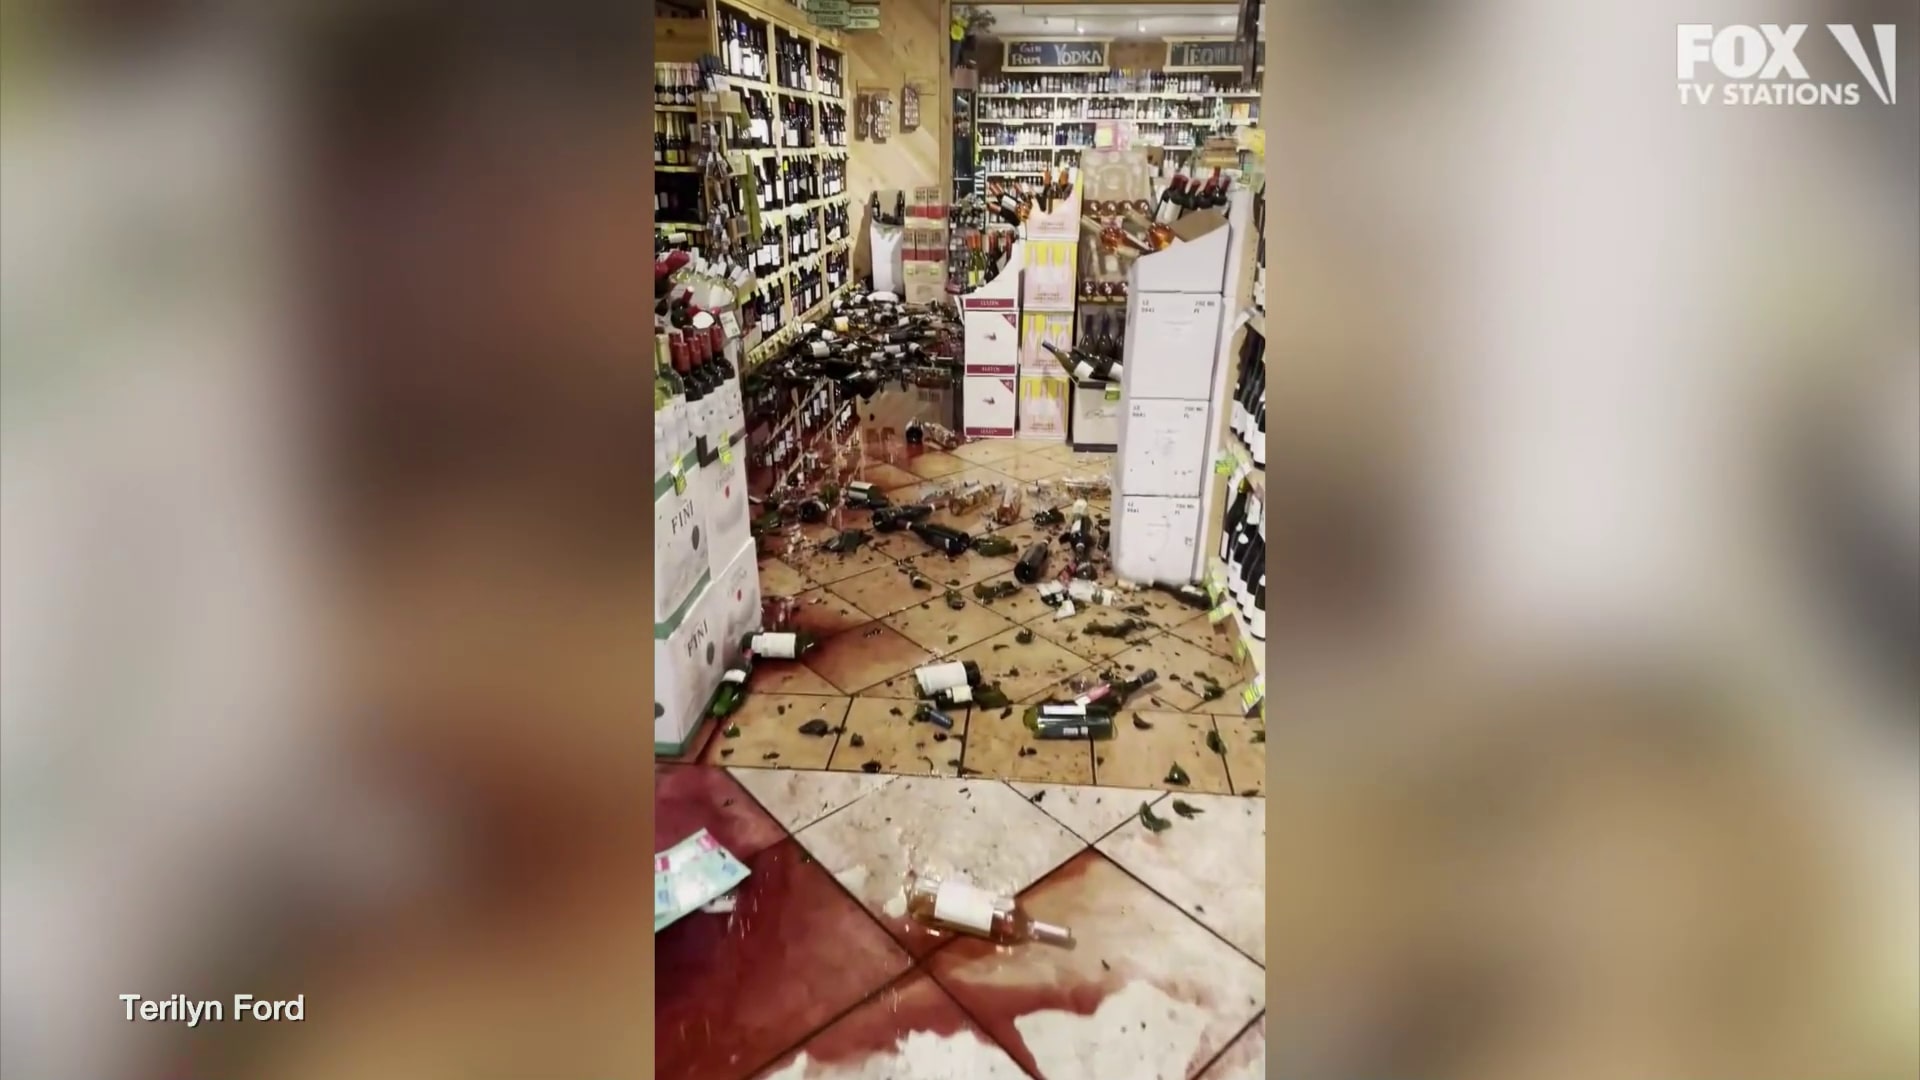 'Hurriquake' knocks over wine bottles at grocery store